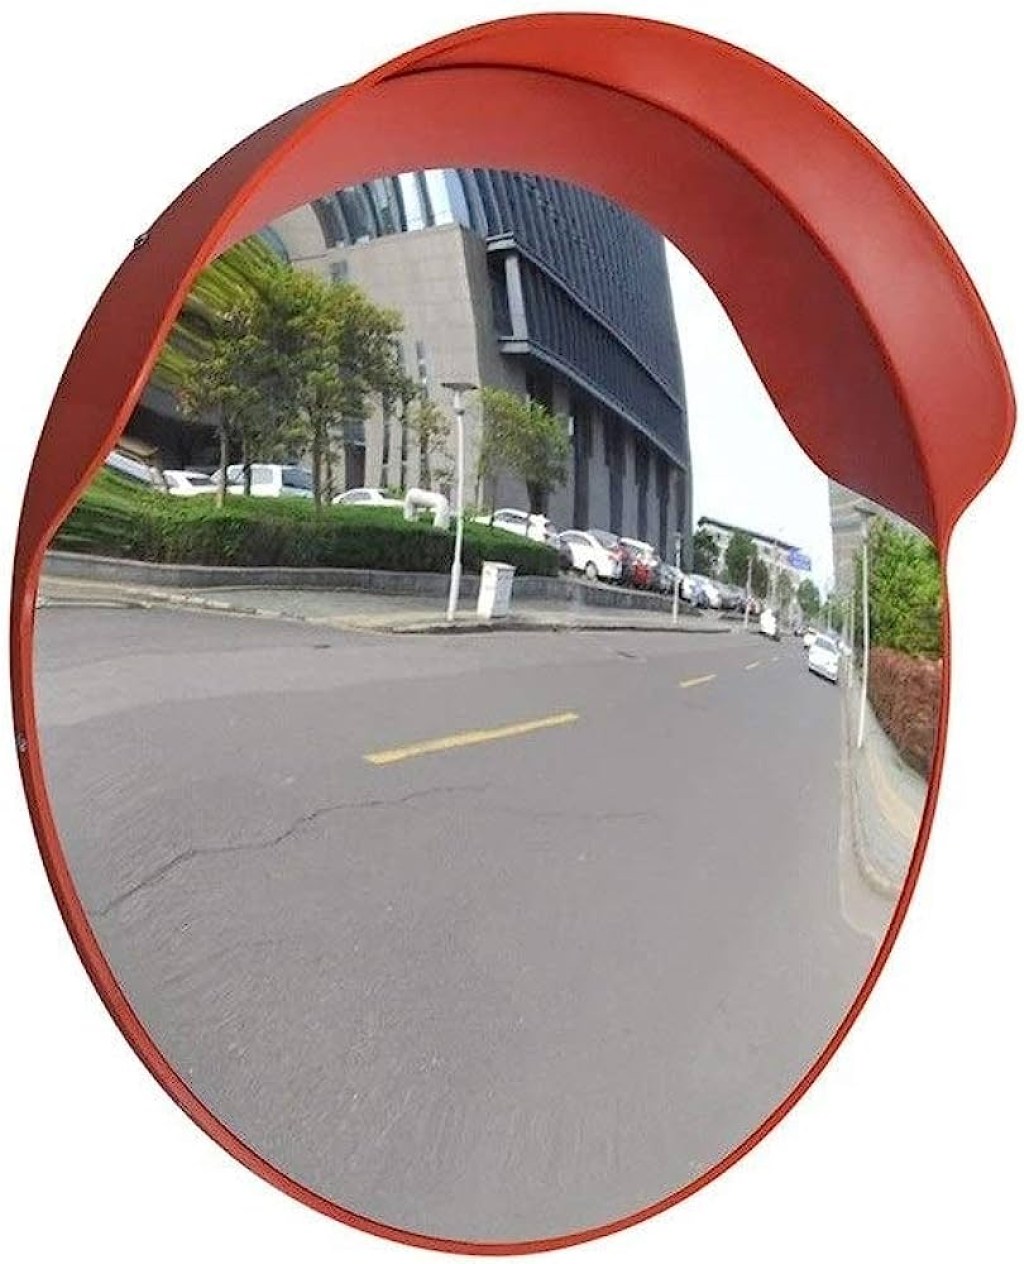 Picture of: Outdoor Road Traffic Mirror, PC Shatterproof Convex Mirror Basement Blind  Angle Mirror for Road Safety and Business Safety (Size:  cm)